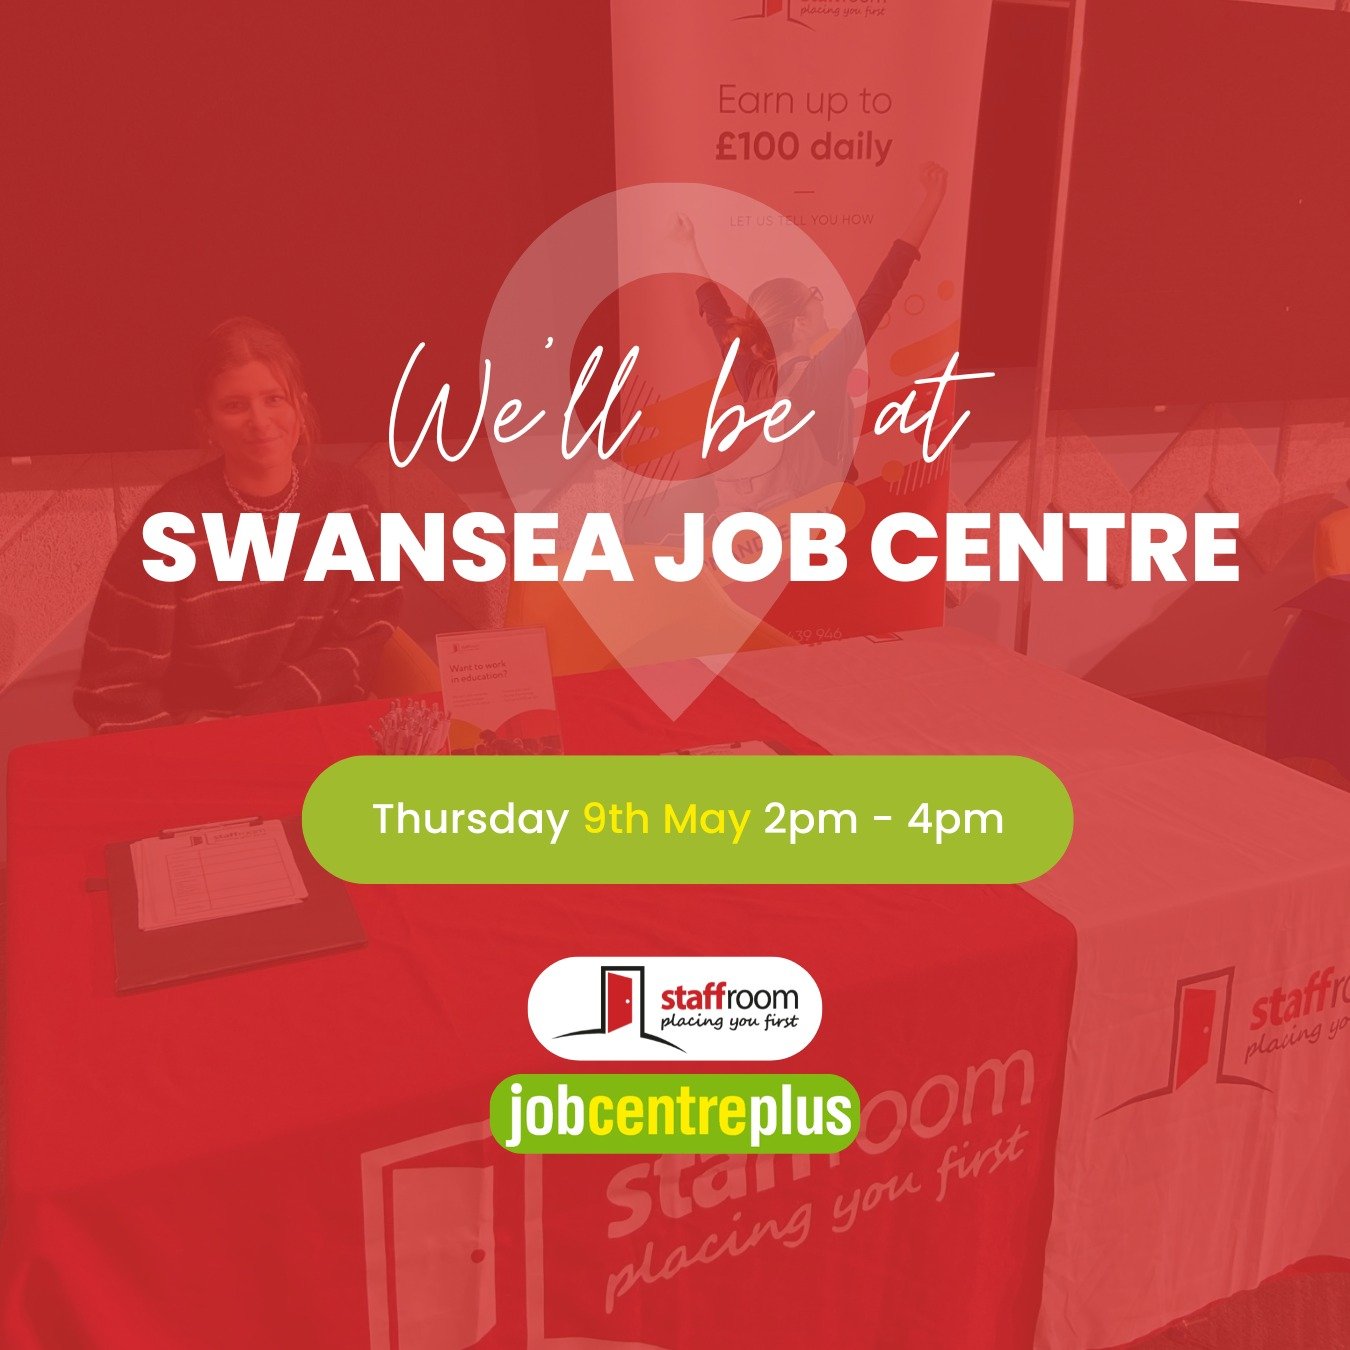 👉NEXT WEEK!👈

Freya will be at #Swansea Job Centre next Thursday, 9th May from 2pm - 4pm to chat all things supply! 

Why not pop in and say hello?👋

#jobopportunities #swanseaworking #edujobs #flexiblework